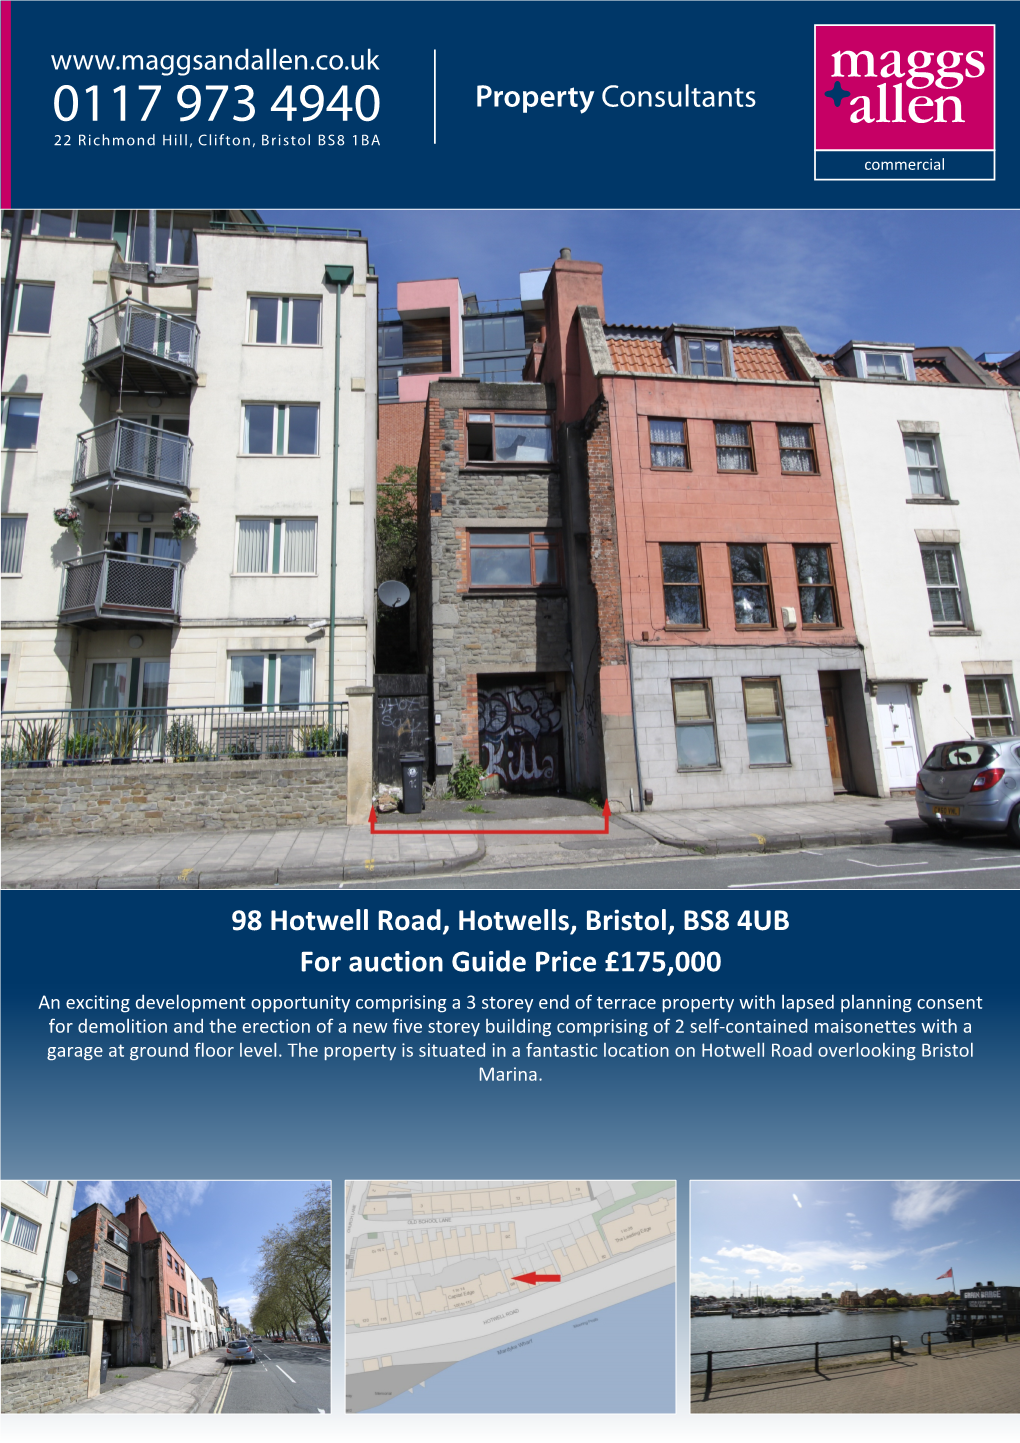 Property Consultants 98 Hotwell Road, Hotwells, Bristol, BS8 4UB for Auction Guide Price £175,000